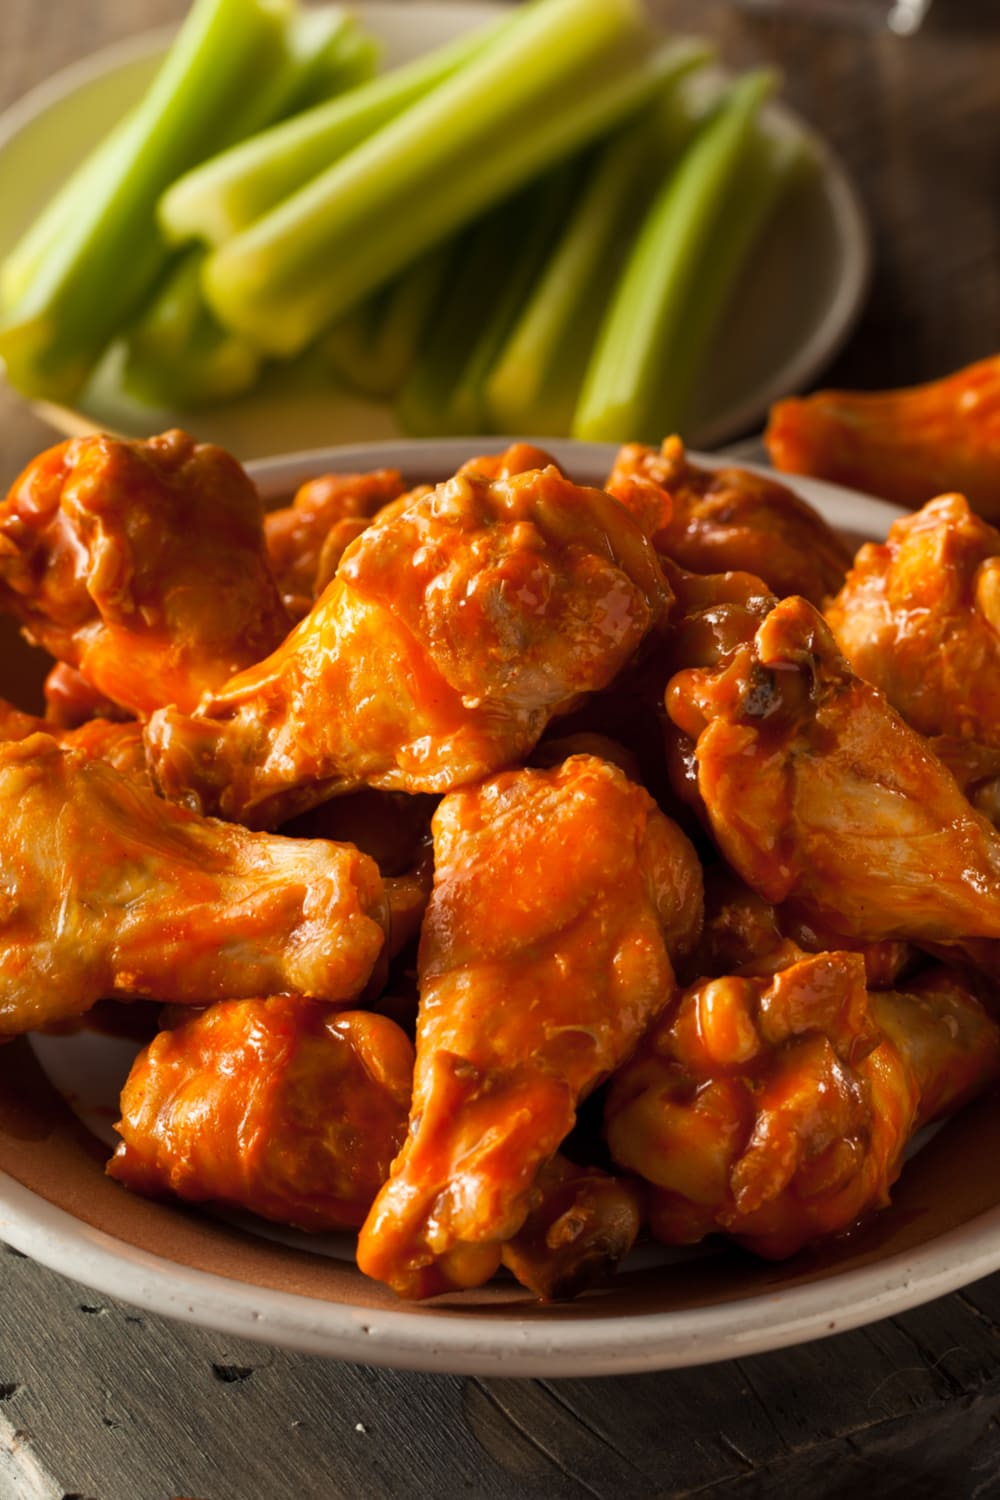 Looking for tasty keto dinner ideas? These Buffalo Wild Wings are one of my favorite low-carb meals.